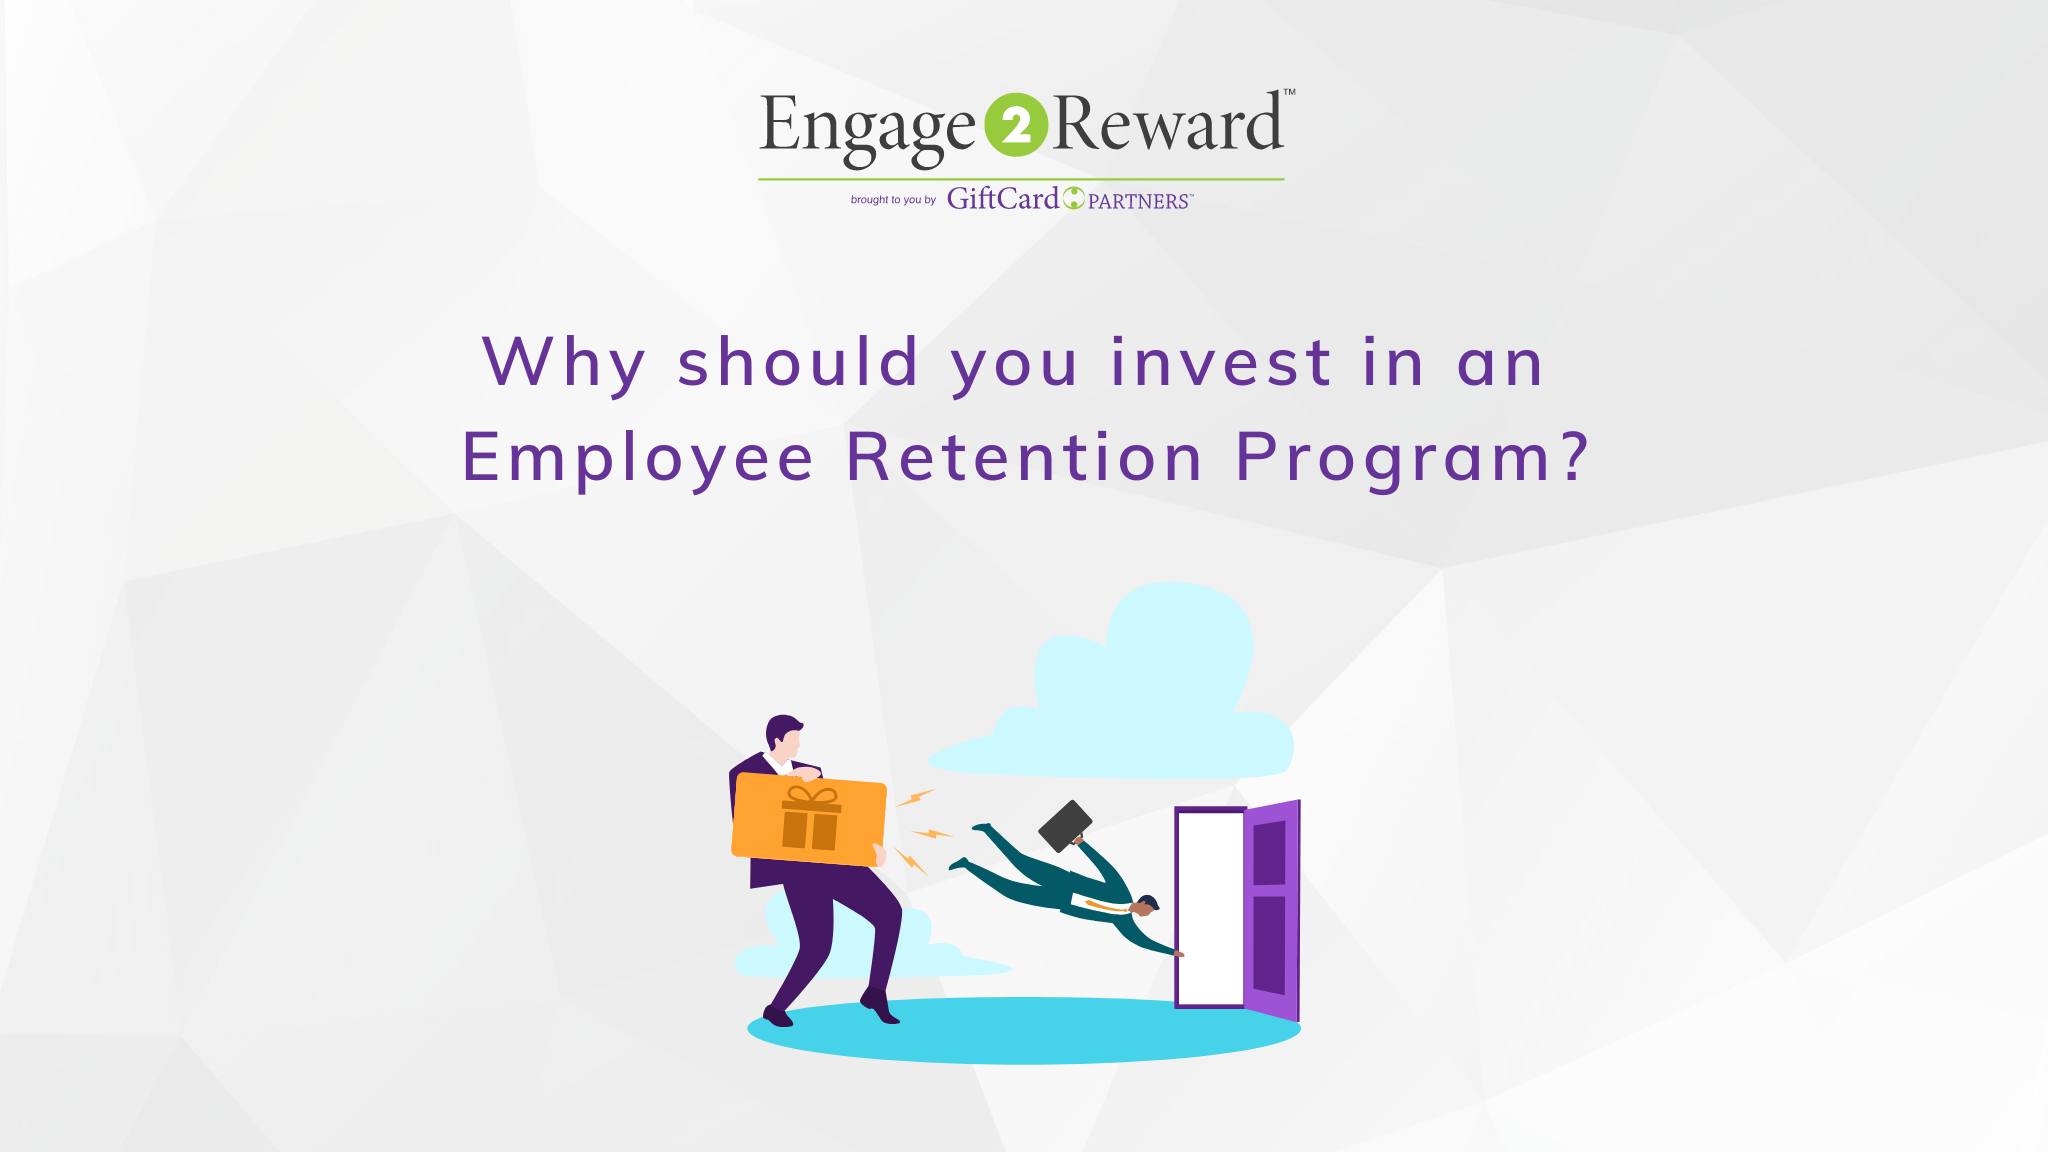 Why should you invest in an Employee Retention Program?